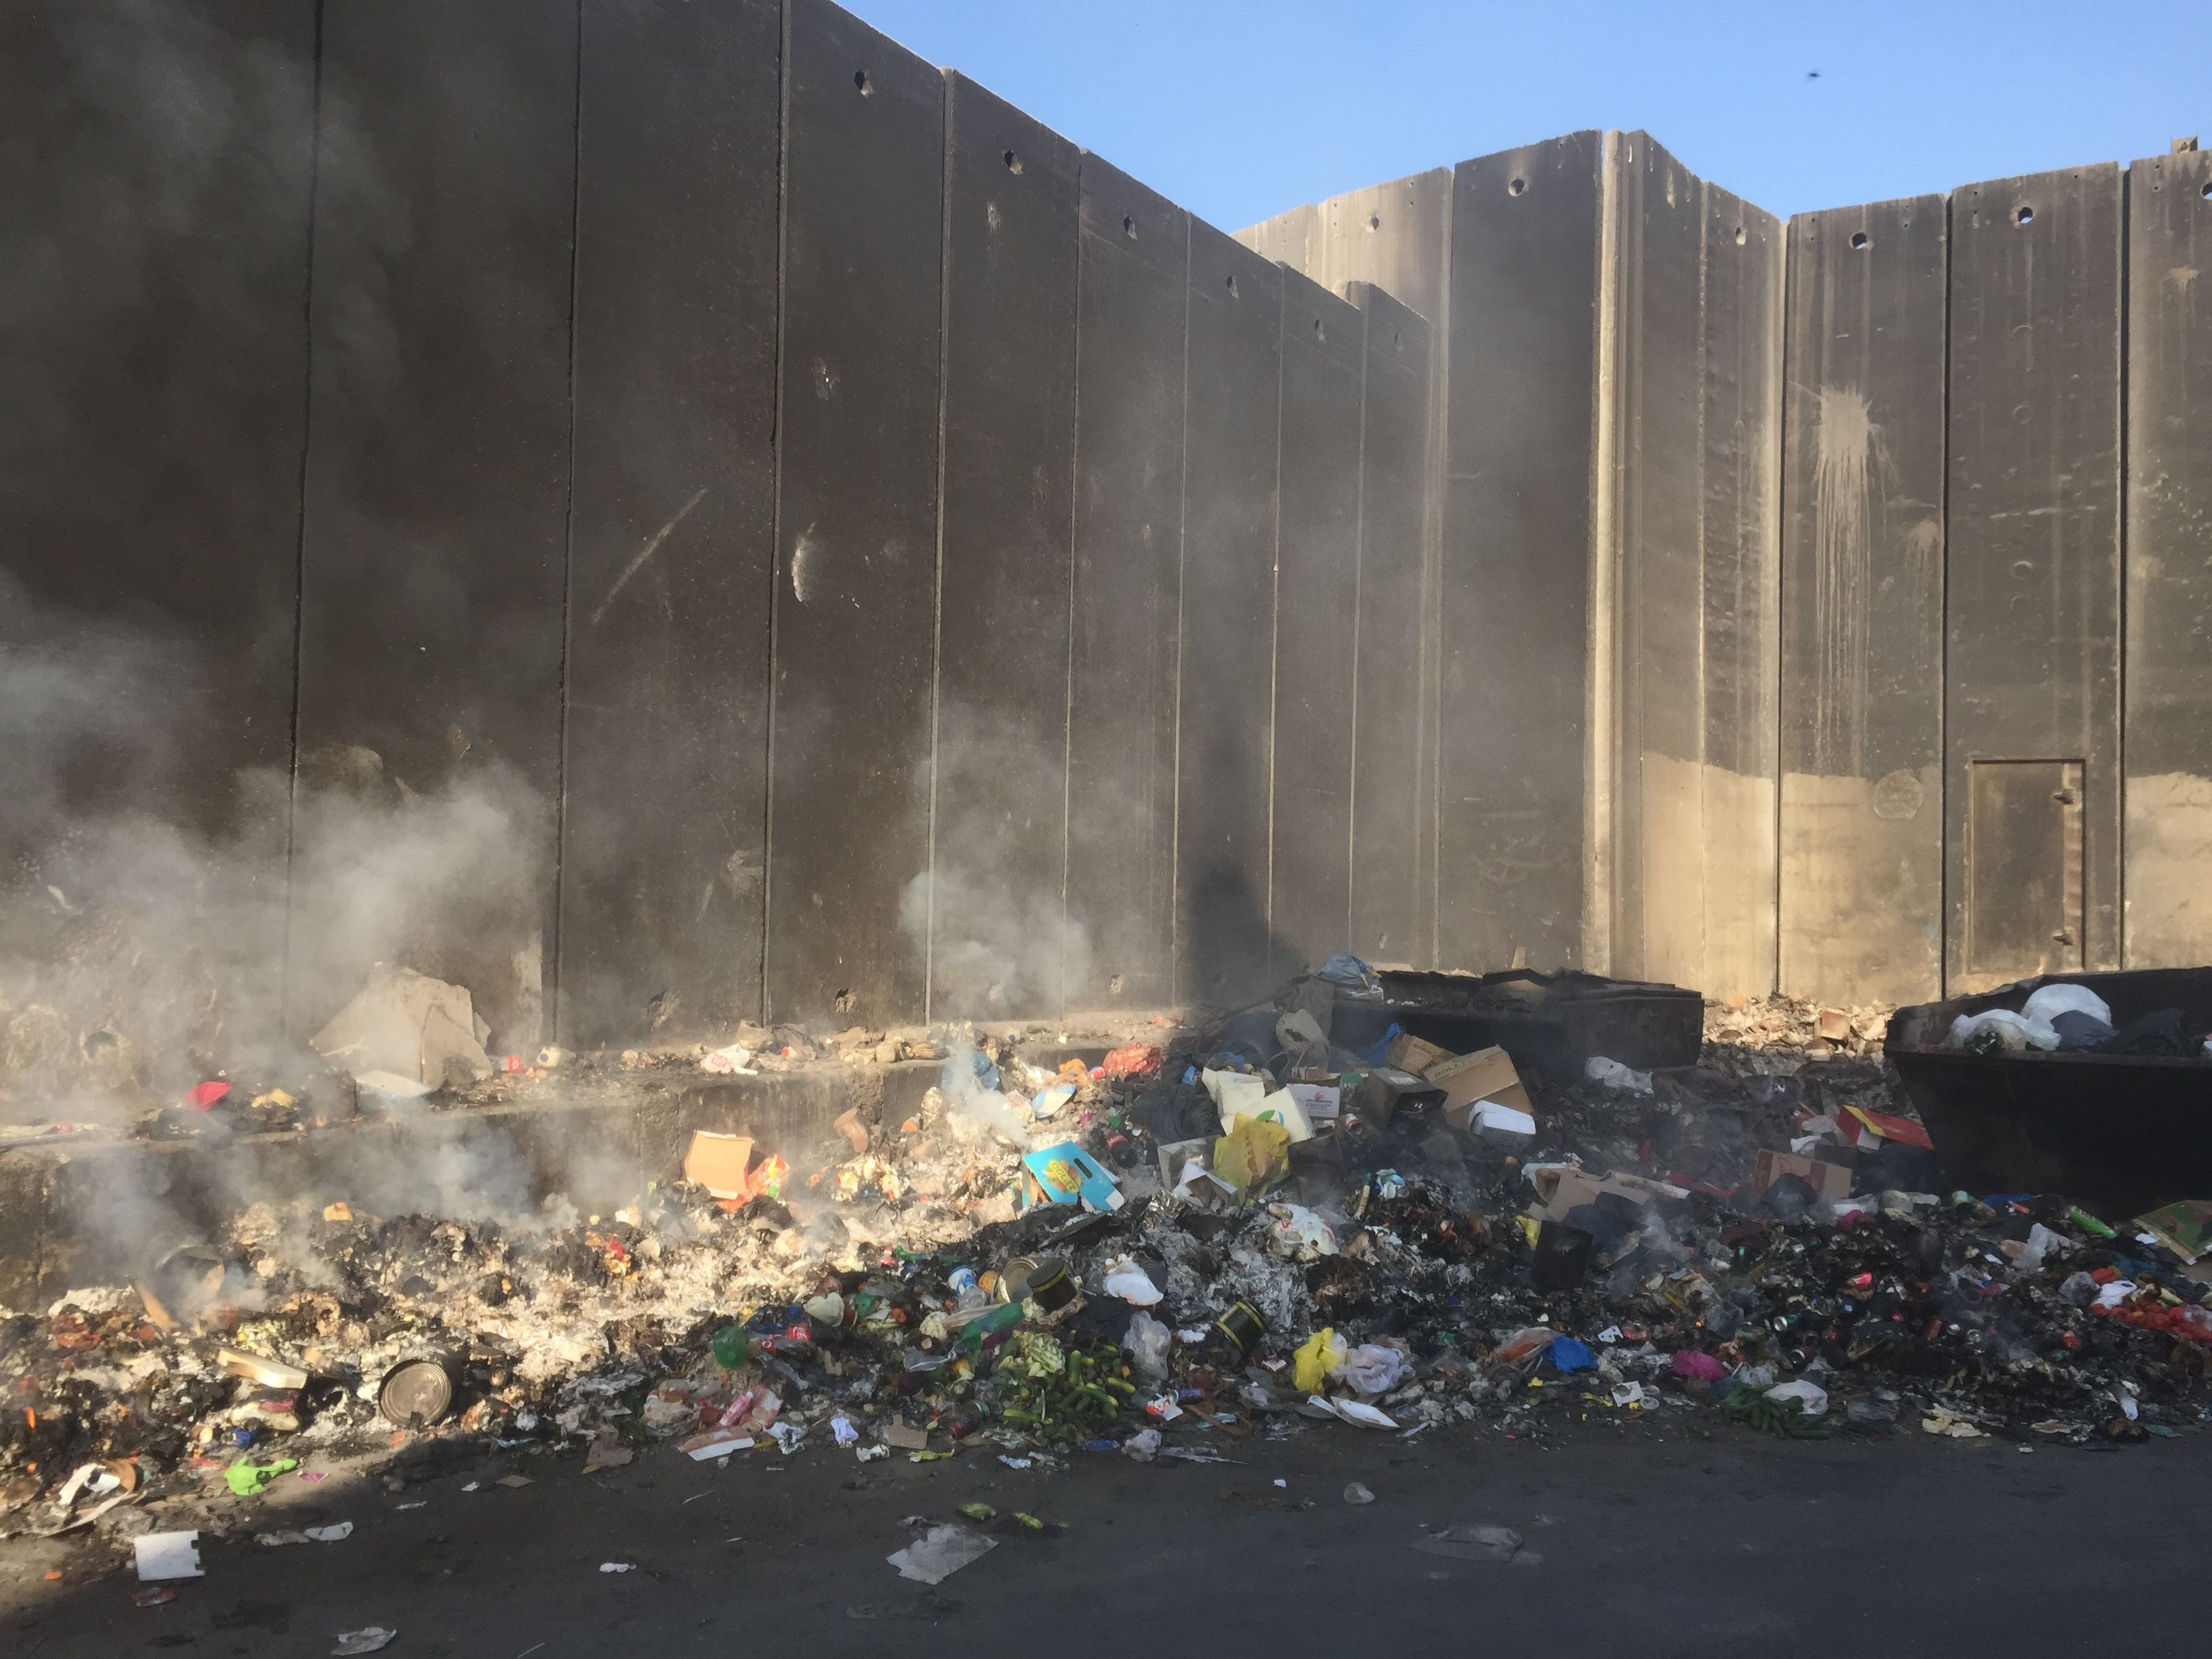 Rubbish burns on the Palestinian side of the illegal Israeli Separation Wall that cuts deep into Palestinian territory. Image by Matt Kennard. Palestine, 2016.